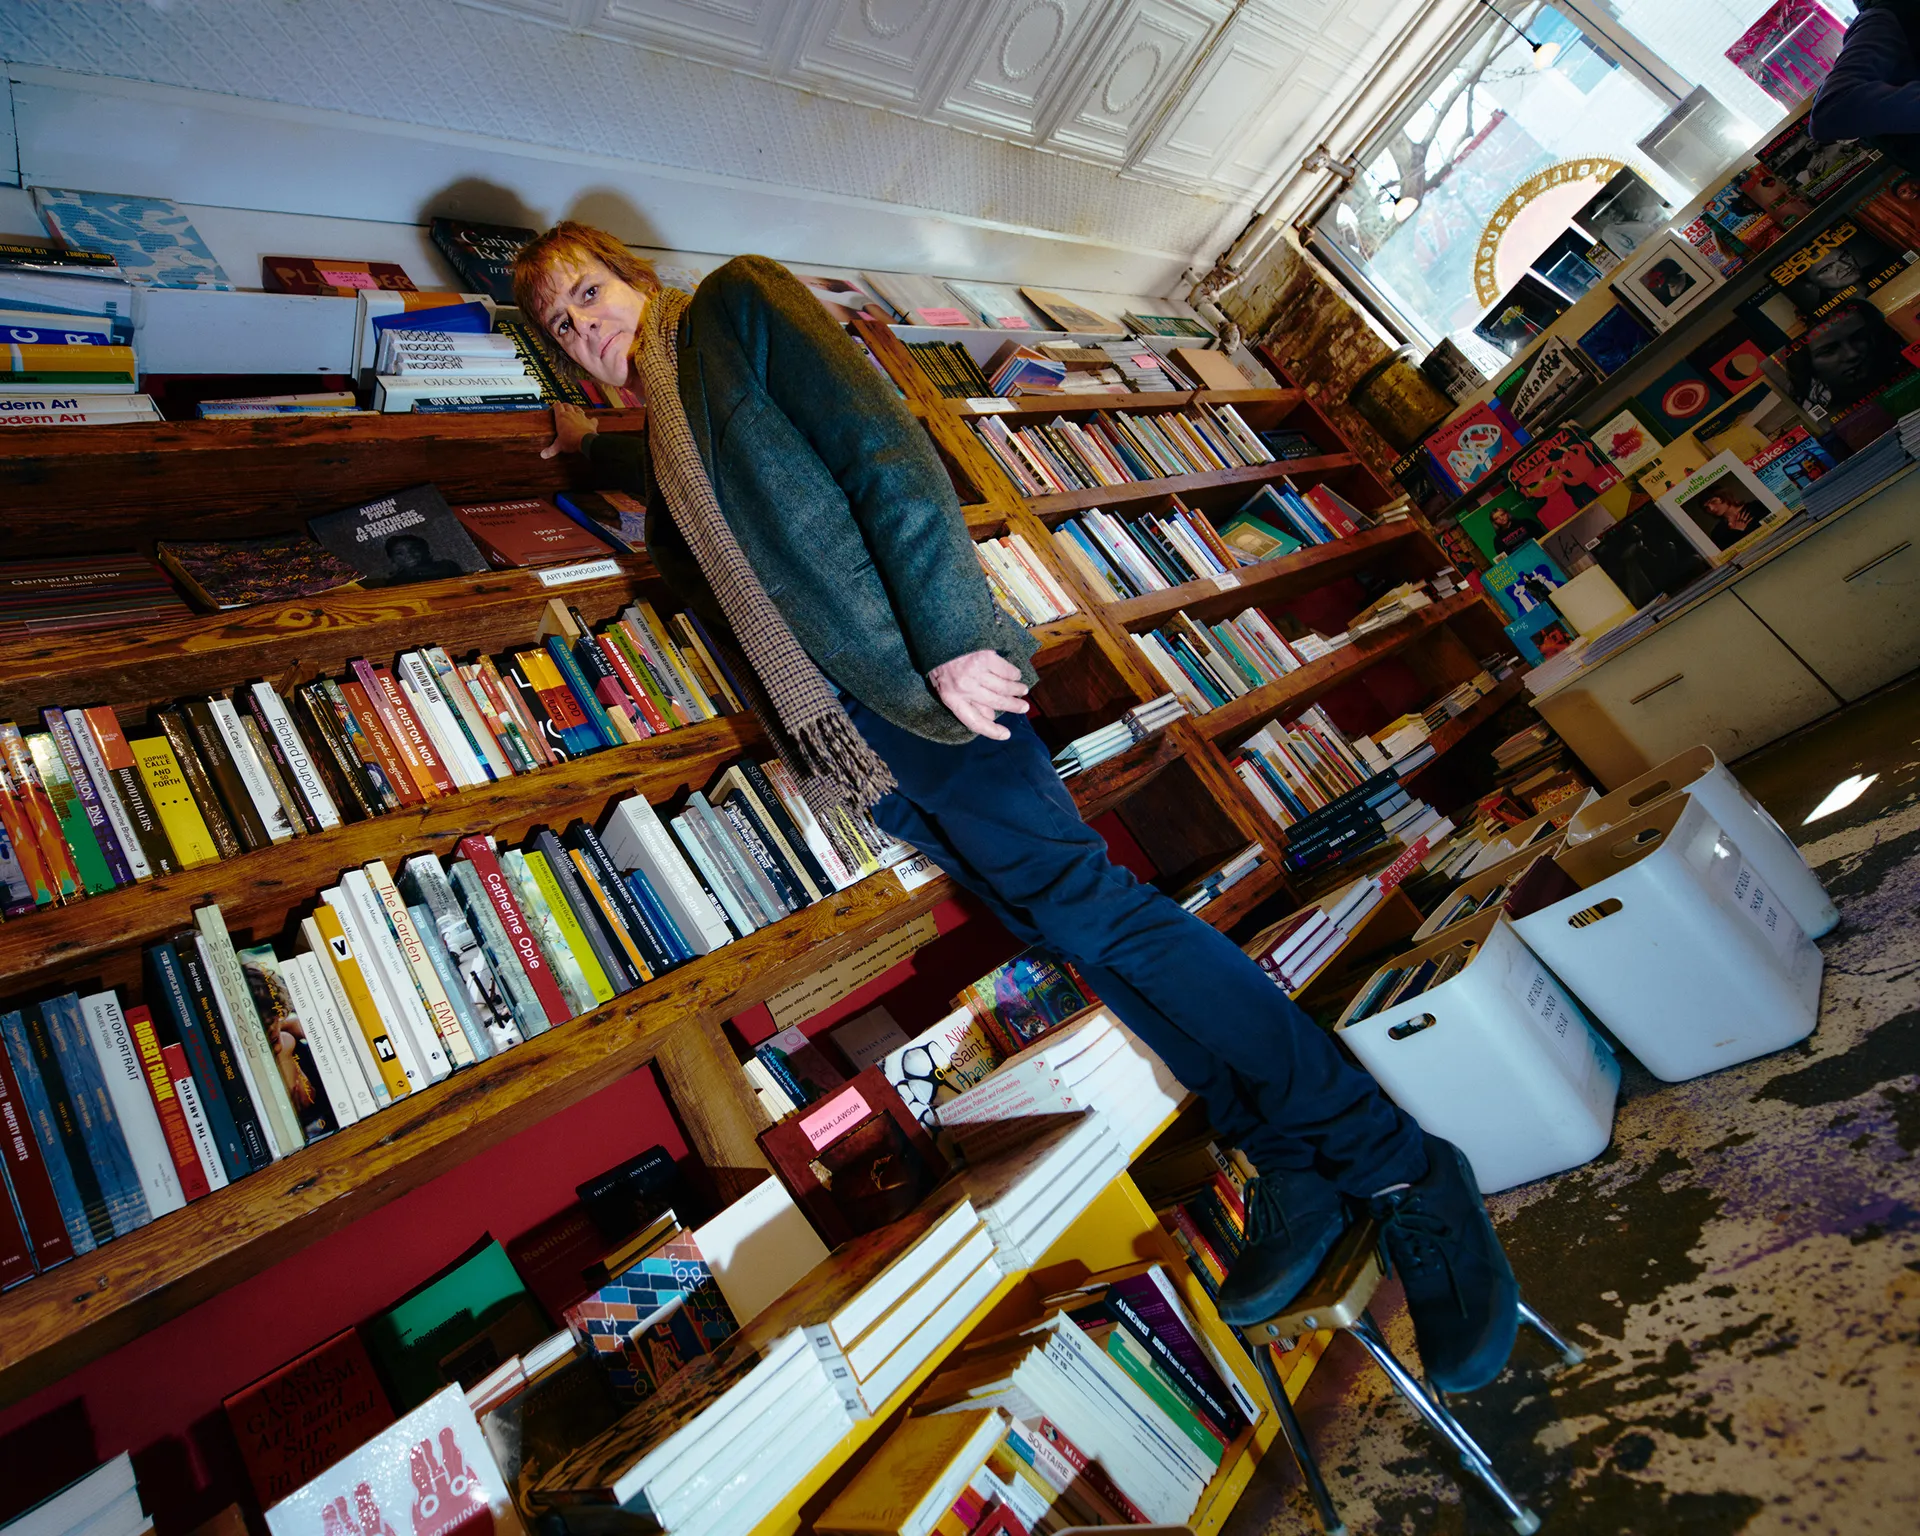 Photograph of a person in front of a full bookshelf